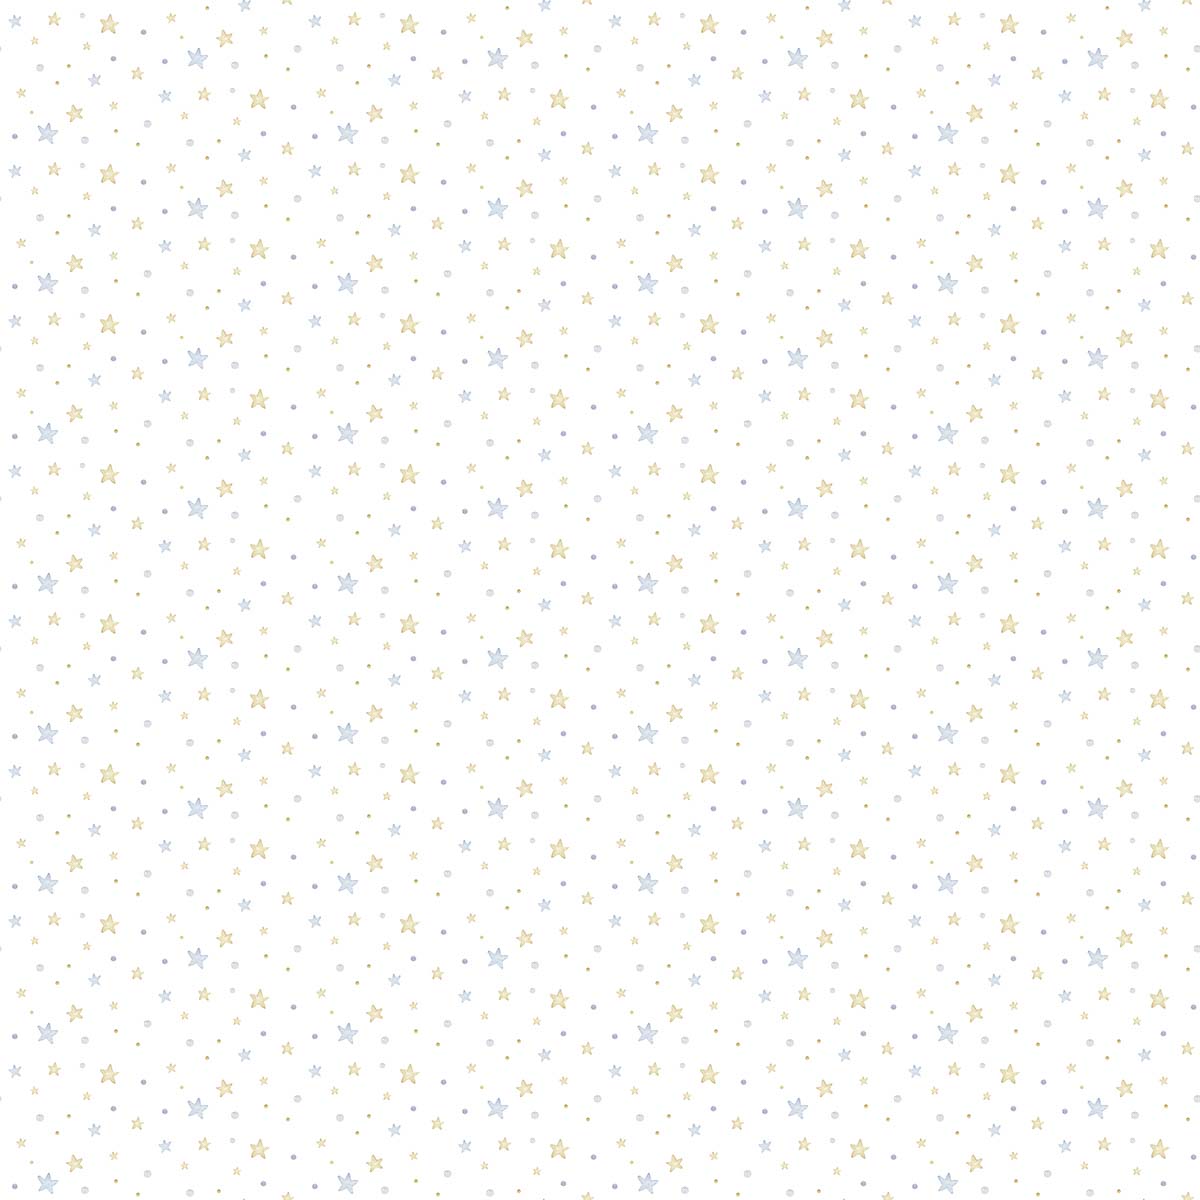 A pattern of stars and dots